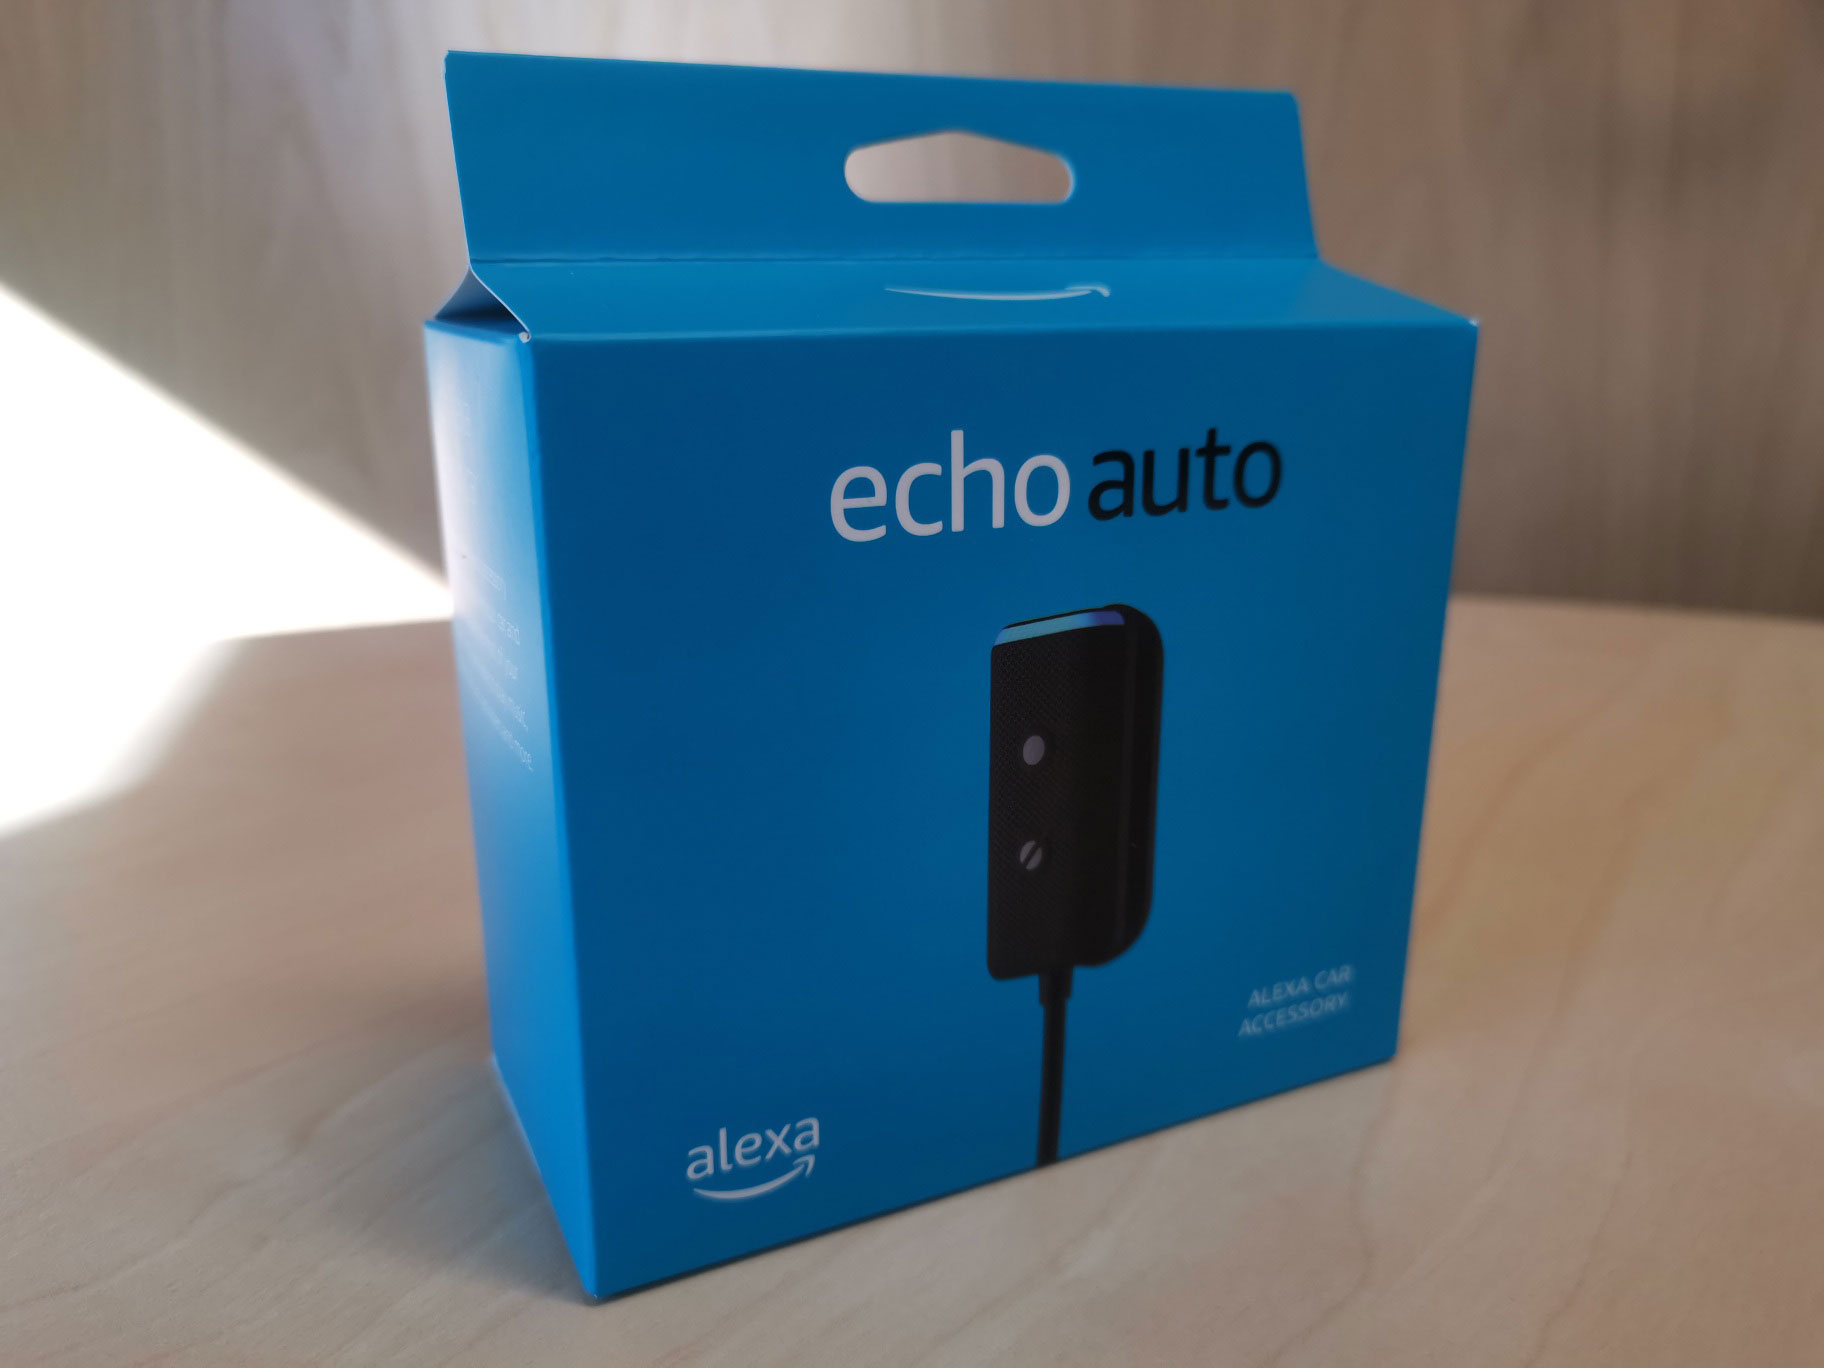 Echo Auto (2nd Gen) review: Alexa for your car just got a big upgrade